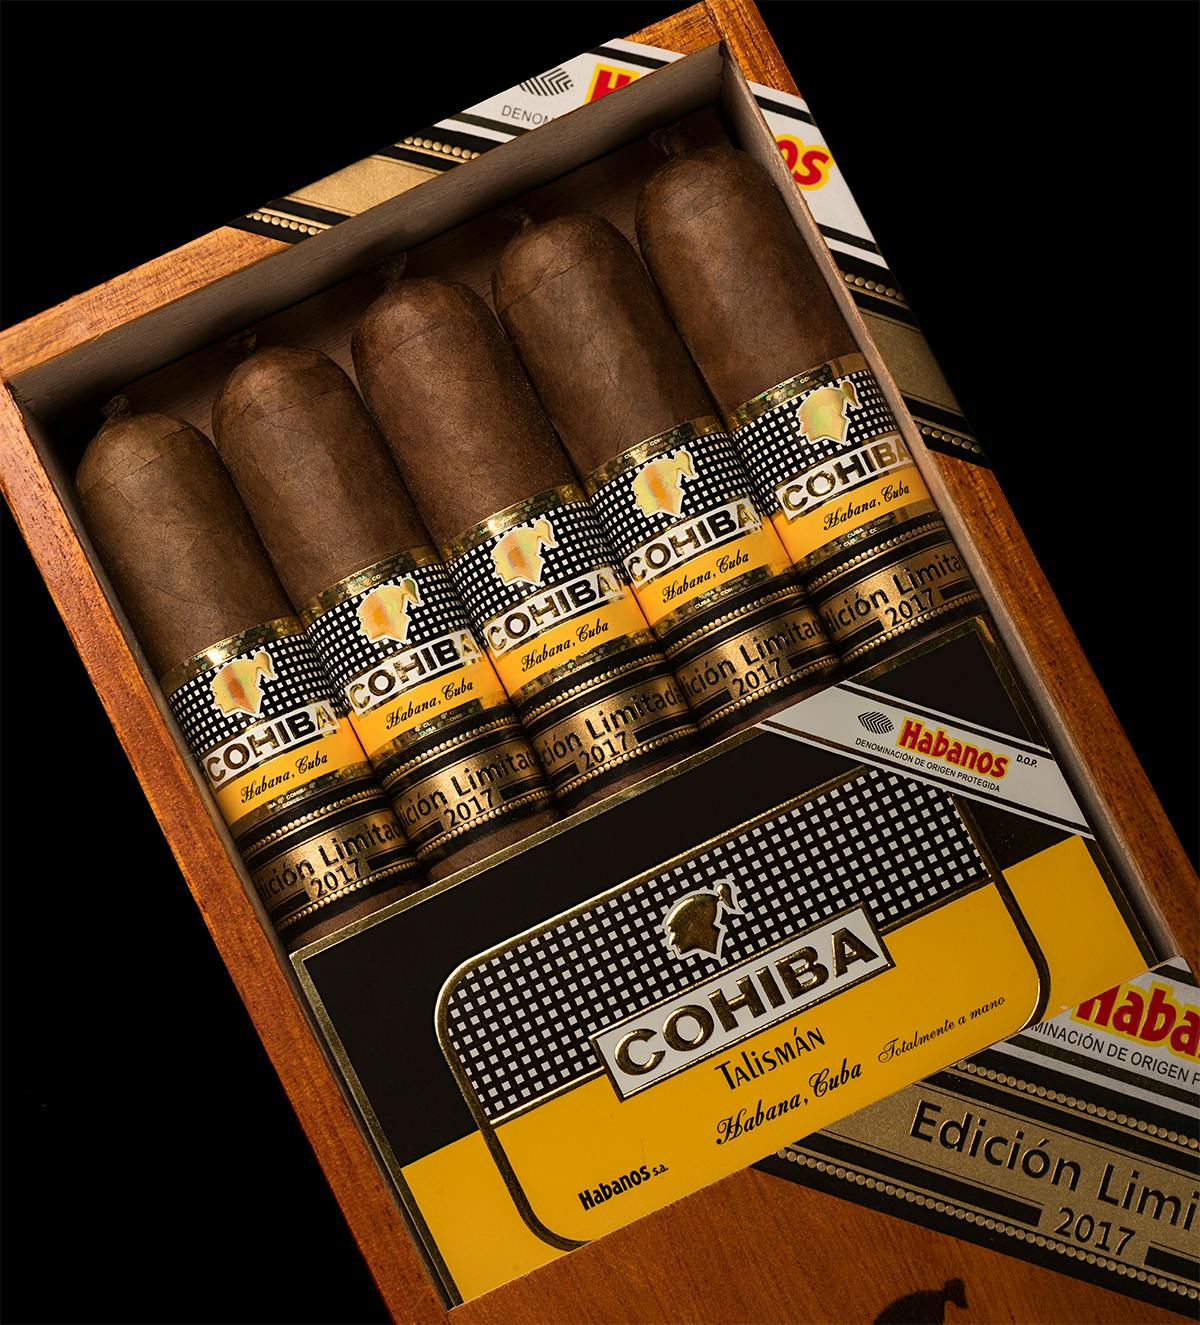 The Cohiba Talismán is fairly fat for a Cuban cigar, with a 54 ring gauge and a length of 6 1/8 inches.